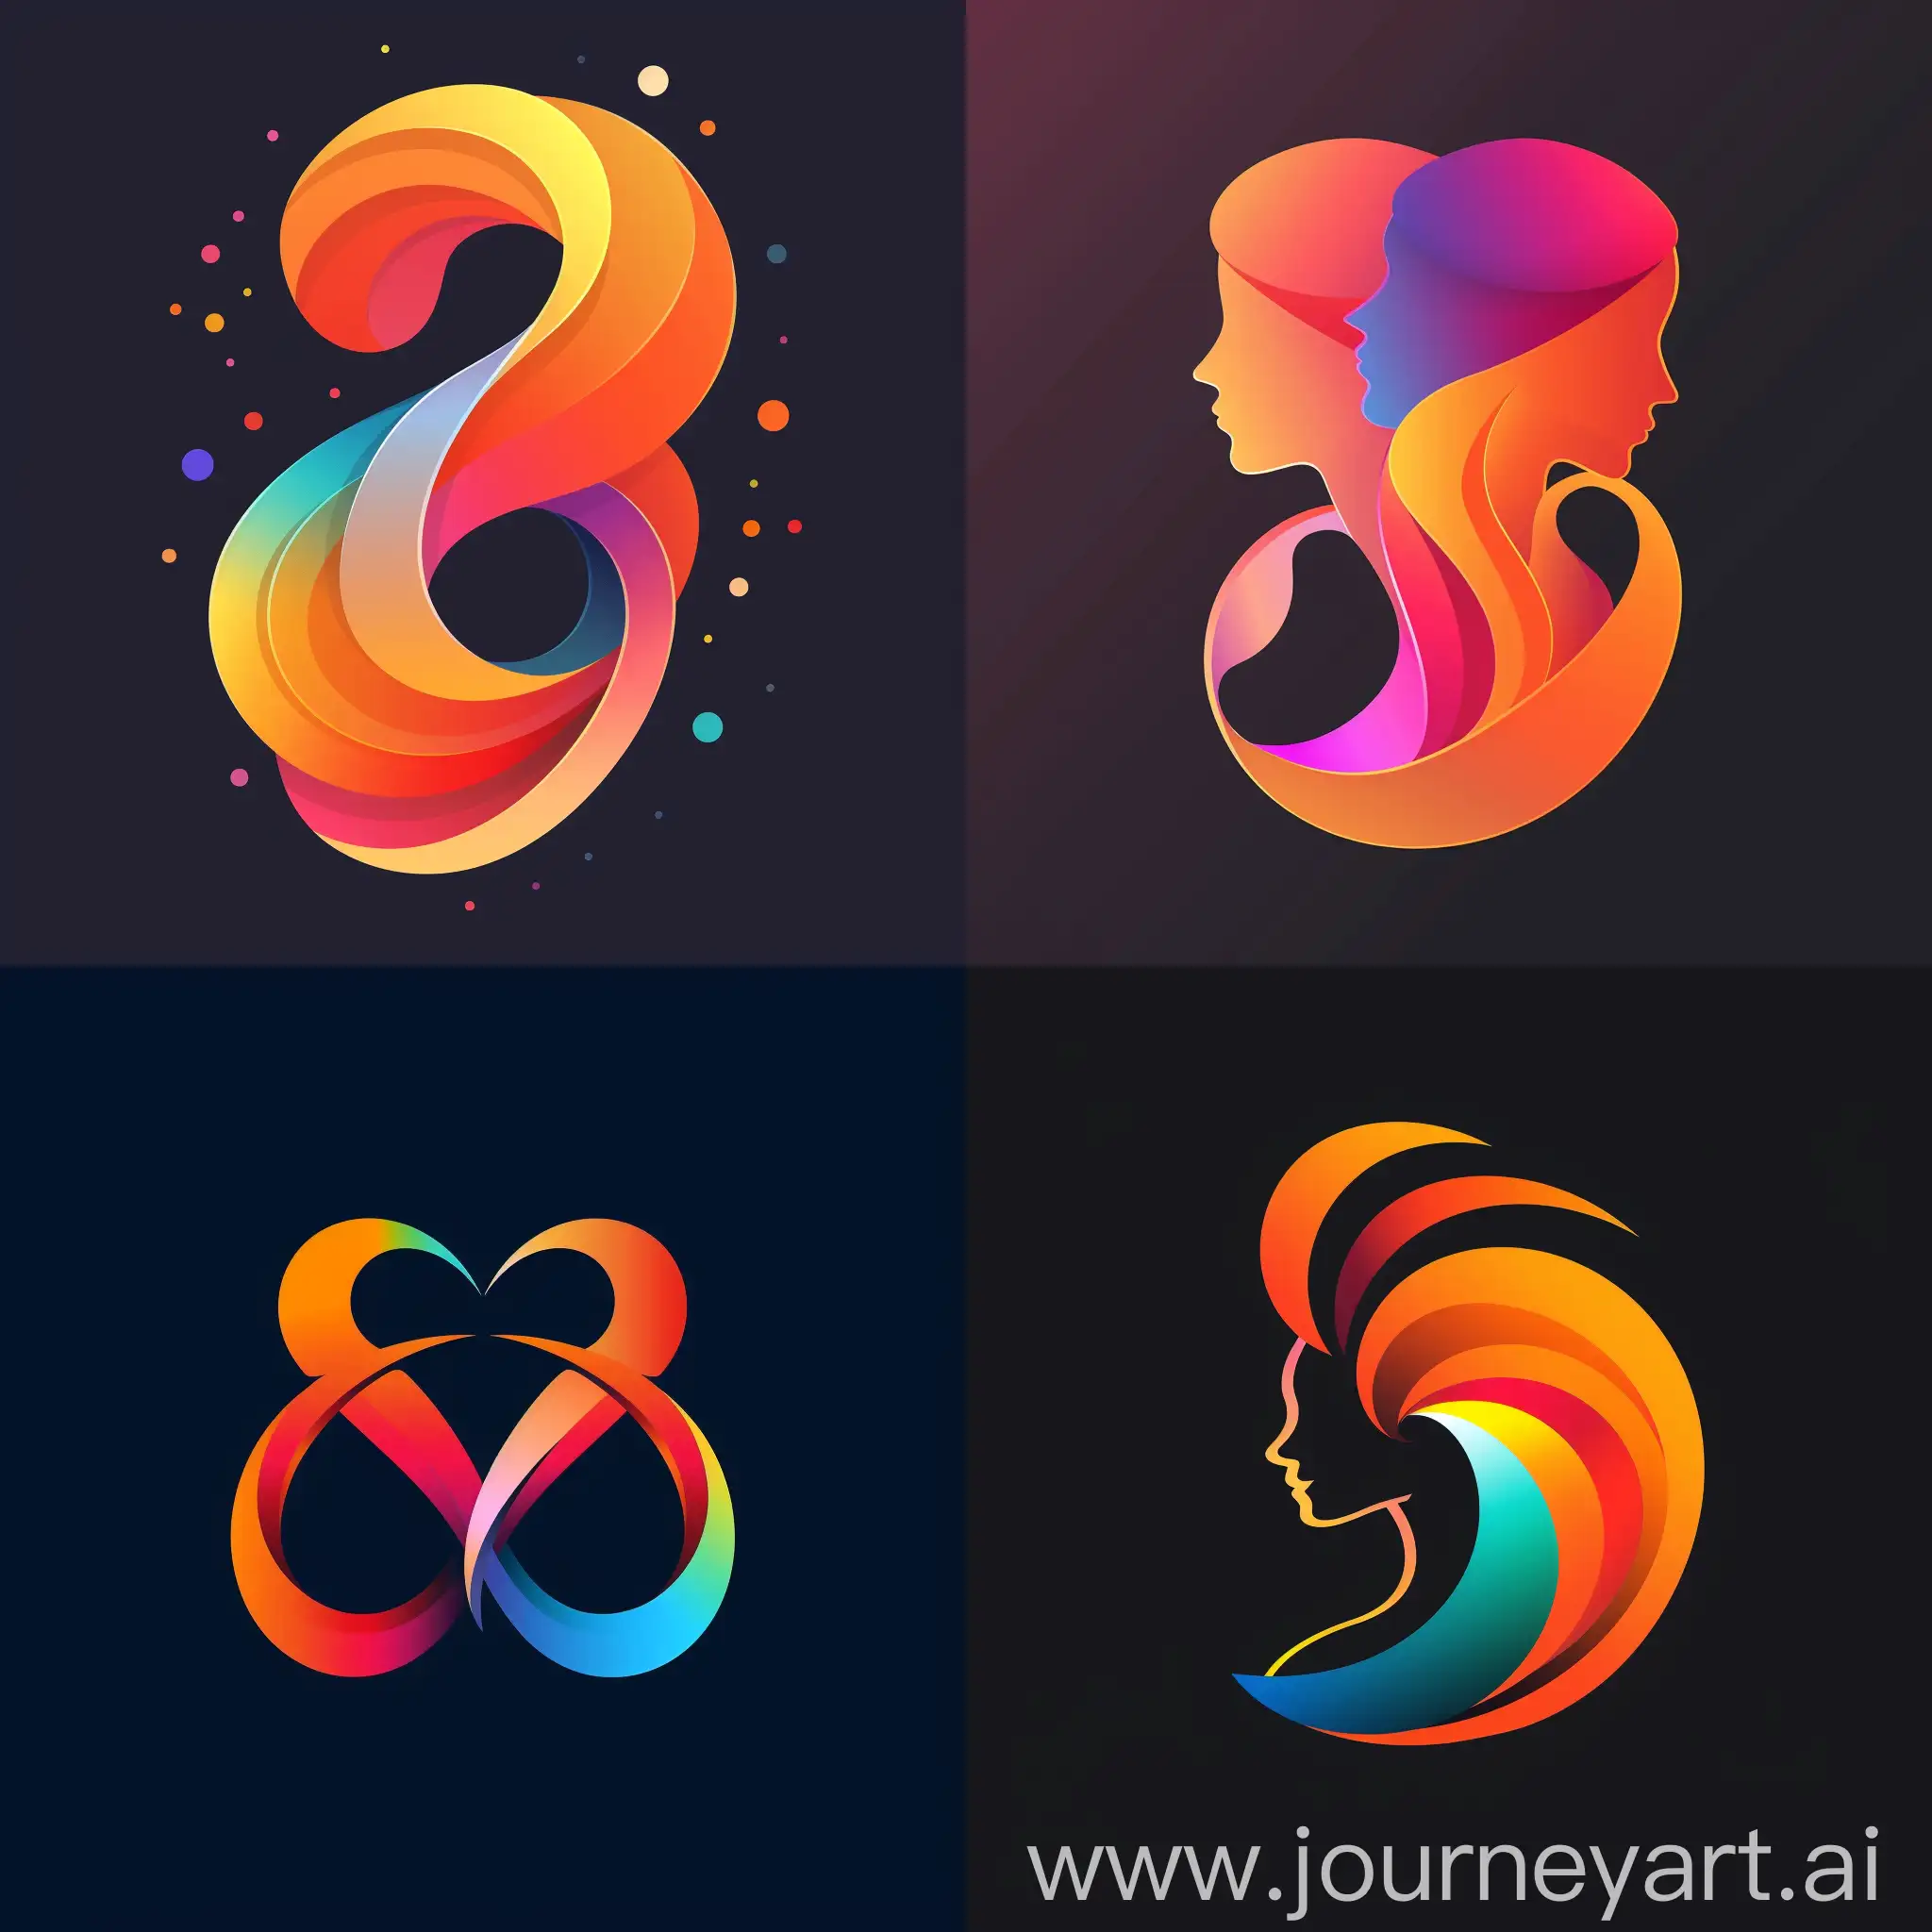 a logo for a social media store selling followers and engagement,  A symbol that reflects technology and rapid growth, such as social networks, Modern and simple design between bright colors and harmonious tones. Embodying a three-dimensional character that symbolizes followers and interaction, and represents various social media networks. With smooth and futuristic lines, guiding principles and professionalism in serving the front, Using bright colors such as a bright rainbow to convey a lively and energetic message. Colored girls such as red and orange to communicate your need for enthusiasm and interaction. The new design is implemented in a bold and bold style that catches Rossi and highlights the main purpose of the store, An innovative and distinctive social network, characterized by quality and professionalism in providing the service of selling followers and interacting. - Part 10 - Verse 2:3